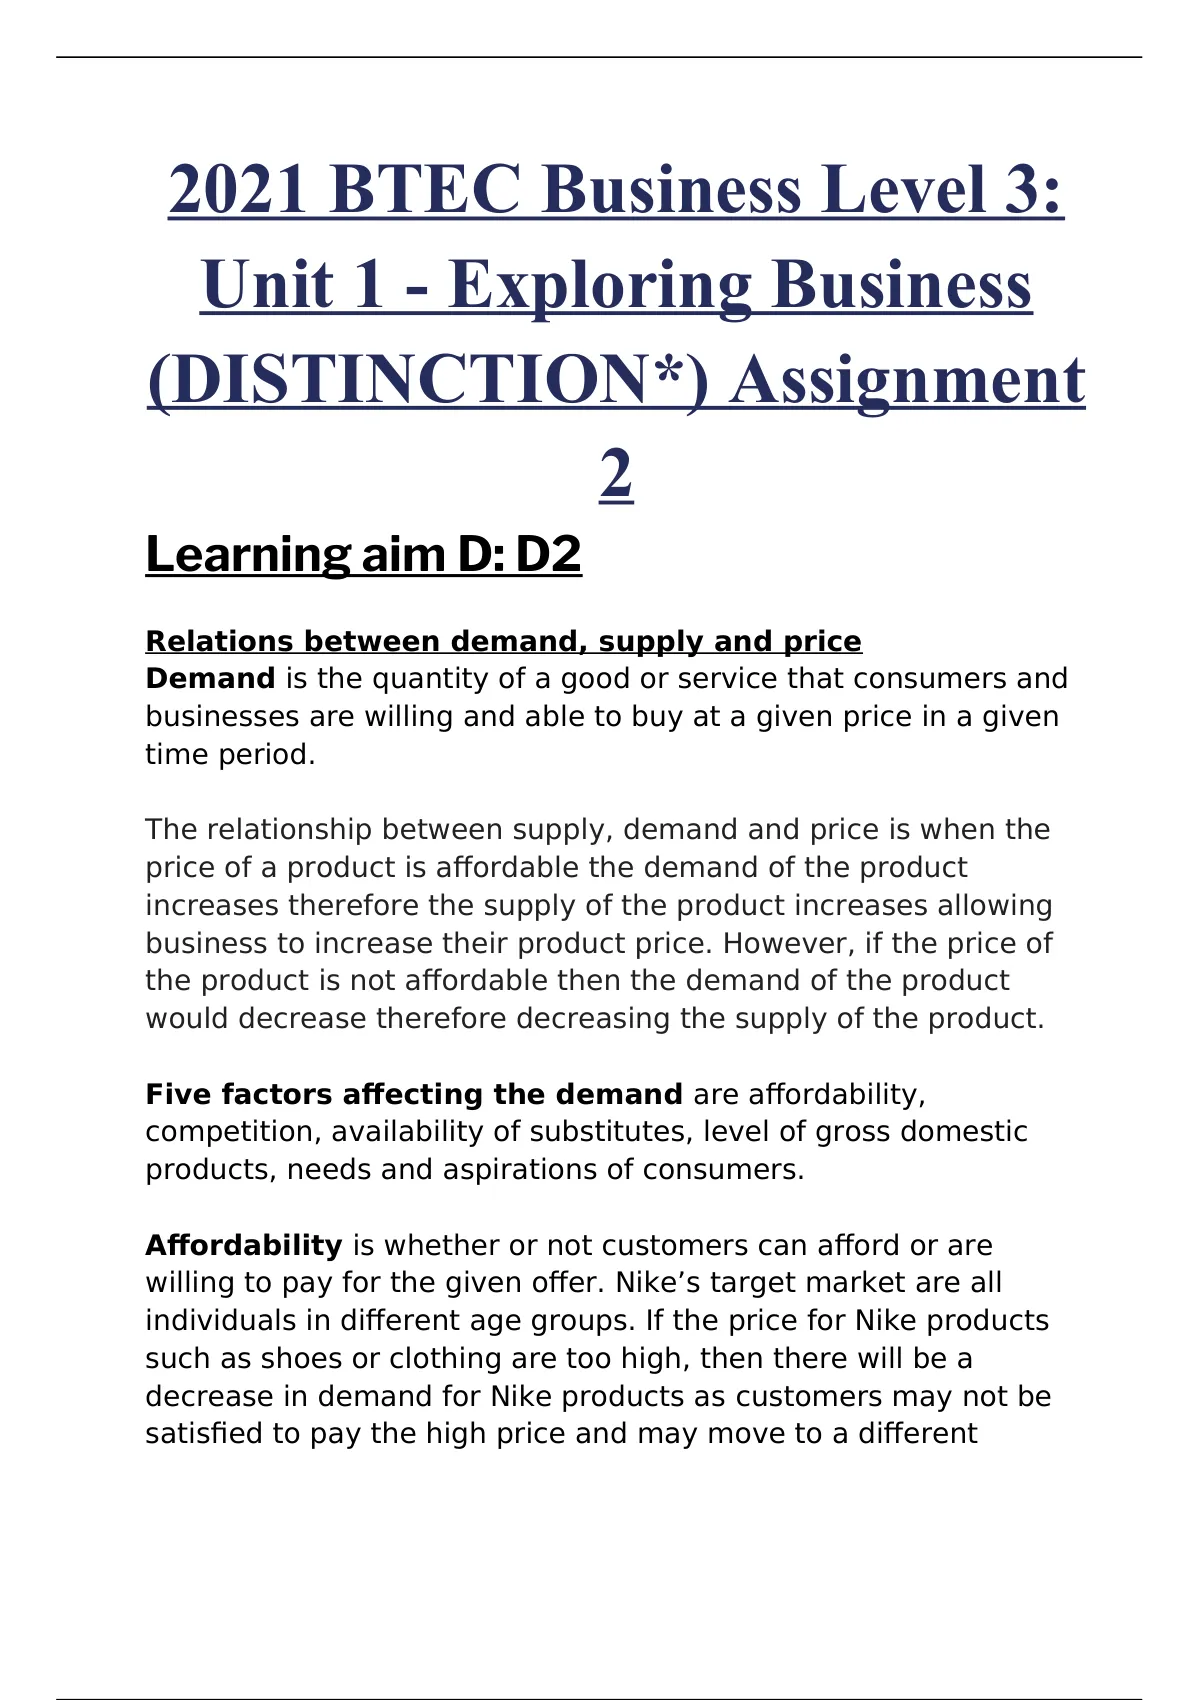 exploring business assignment 2